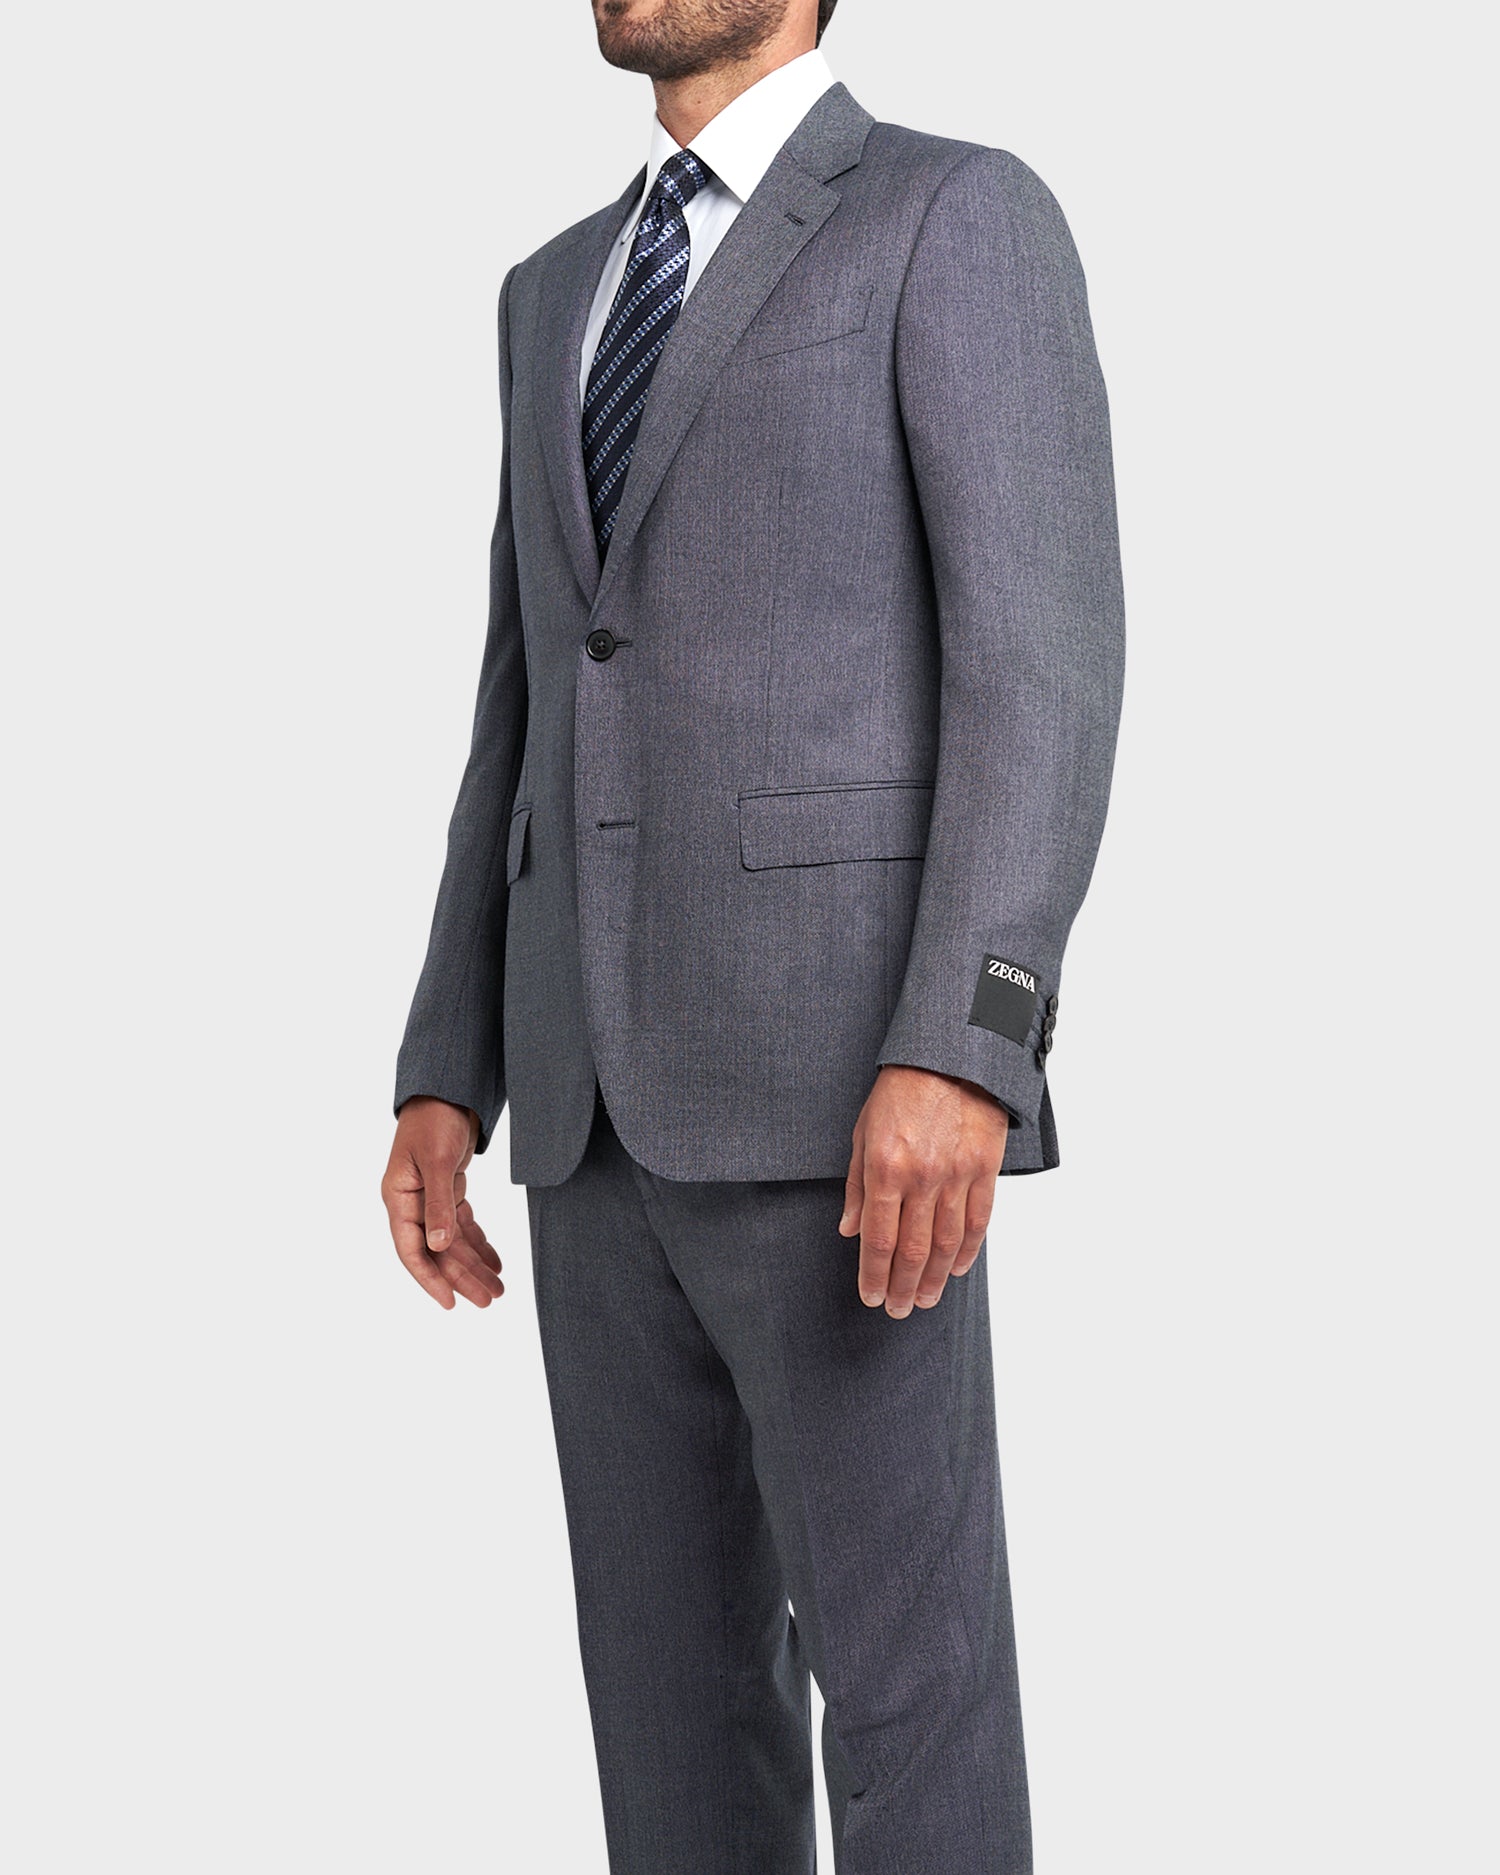 Blue Grey Microstructure15milmil15 Wool Suit